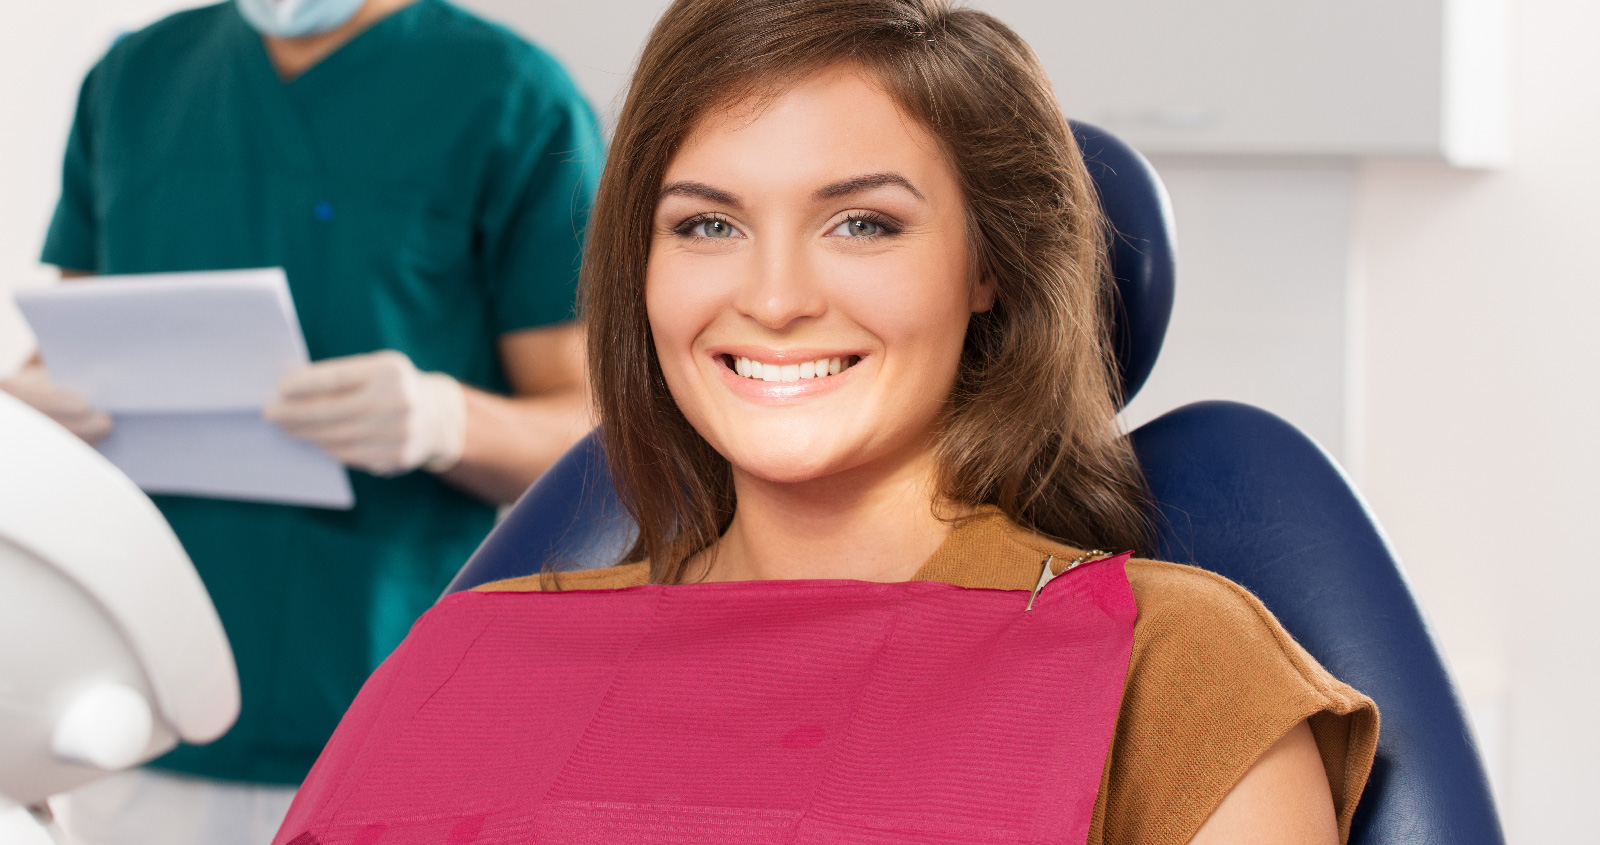 skilled dentist who provide Ozone Dental Care services Near me in Overland Park